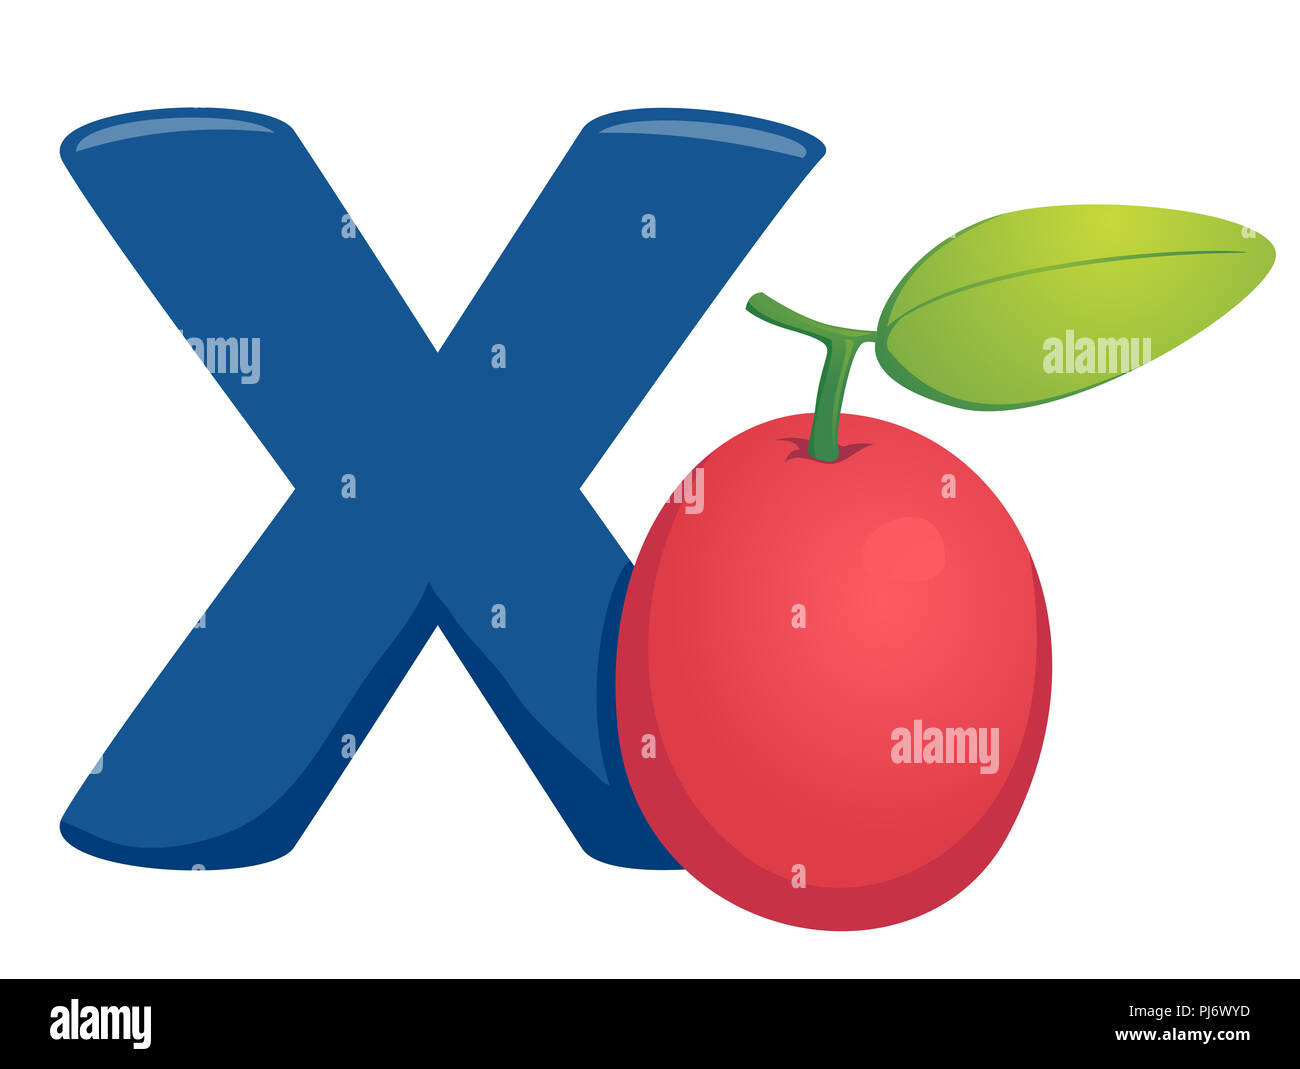 Illustration of Fruits Alphabet, a Blue Letter X and a Ximenia Stock Photo